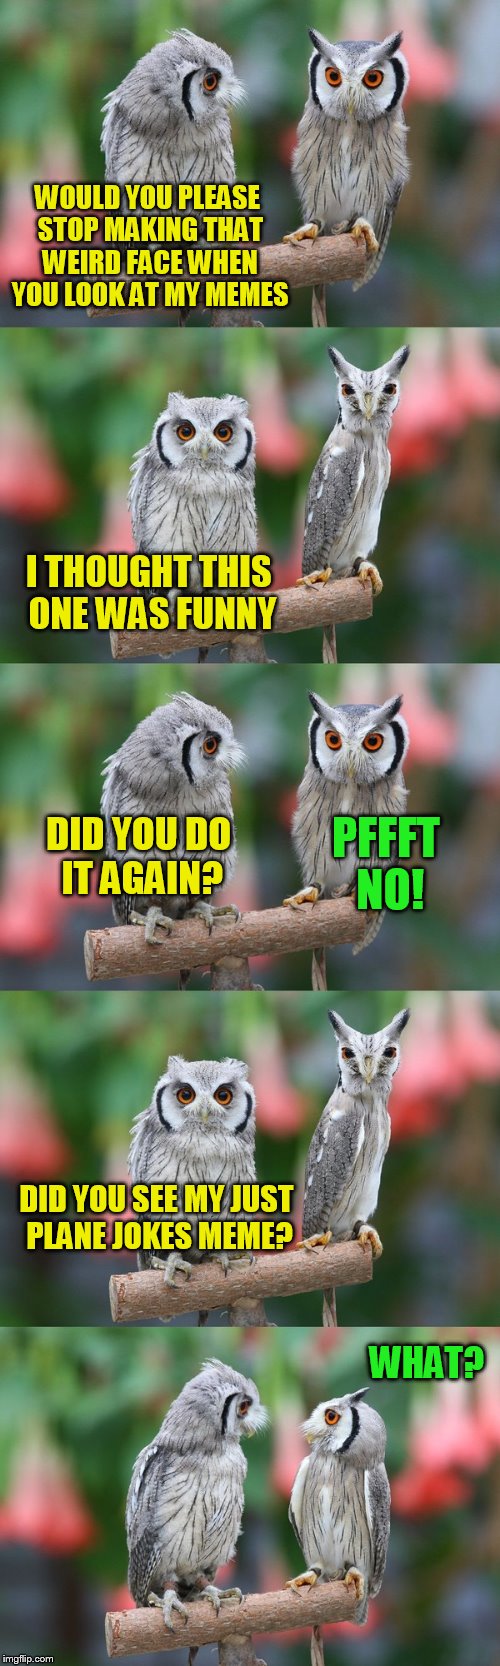 This Is How It Feels When Showing Friends And Family My Memes! | WOULD YOU PLEASE STOP MAKING THAT WEIRD FACE WHEN YOU LOOK AT MY MEMES; I THOUGHT THIS ONE WAS FUNNY; DID YOU DO IT AGAIN? PFFFT NO! DID YOU SEE MY JUST PLANE JOKES MEME? WHAT? | image tagged in memes,dashhopes,owls,friends and family,funny face,fowl puns | made w/ Imgflip meme maker